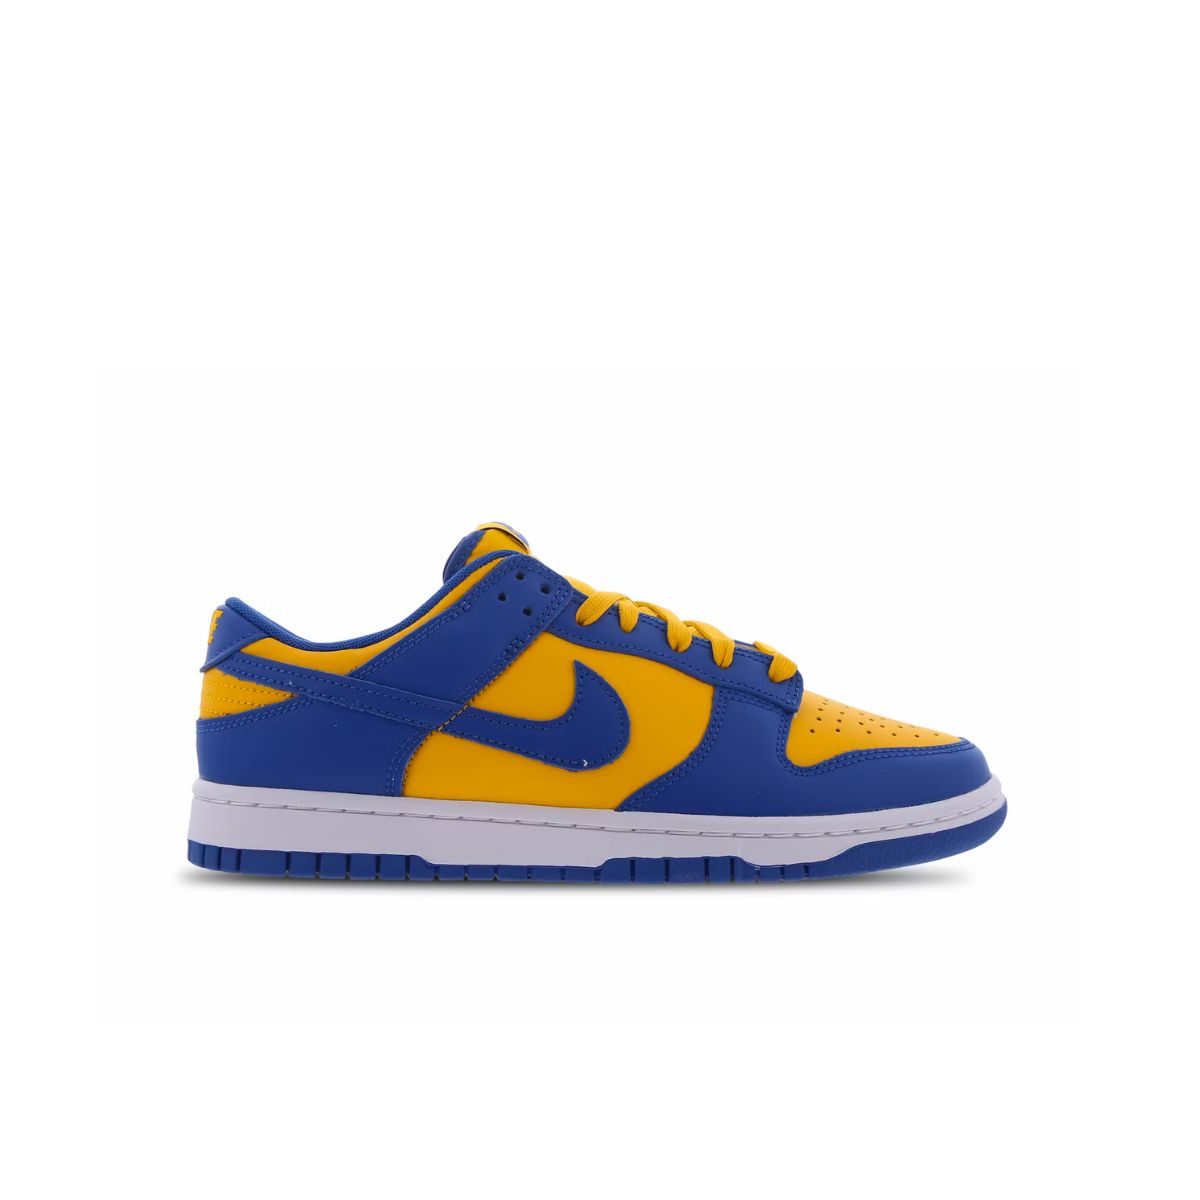 Nike, Dunks, Golden Yellow Shoelace, Replacements